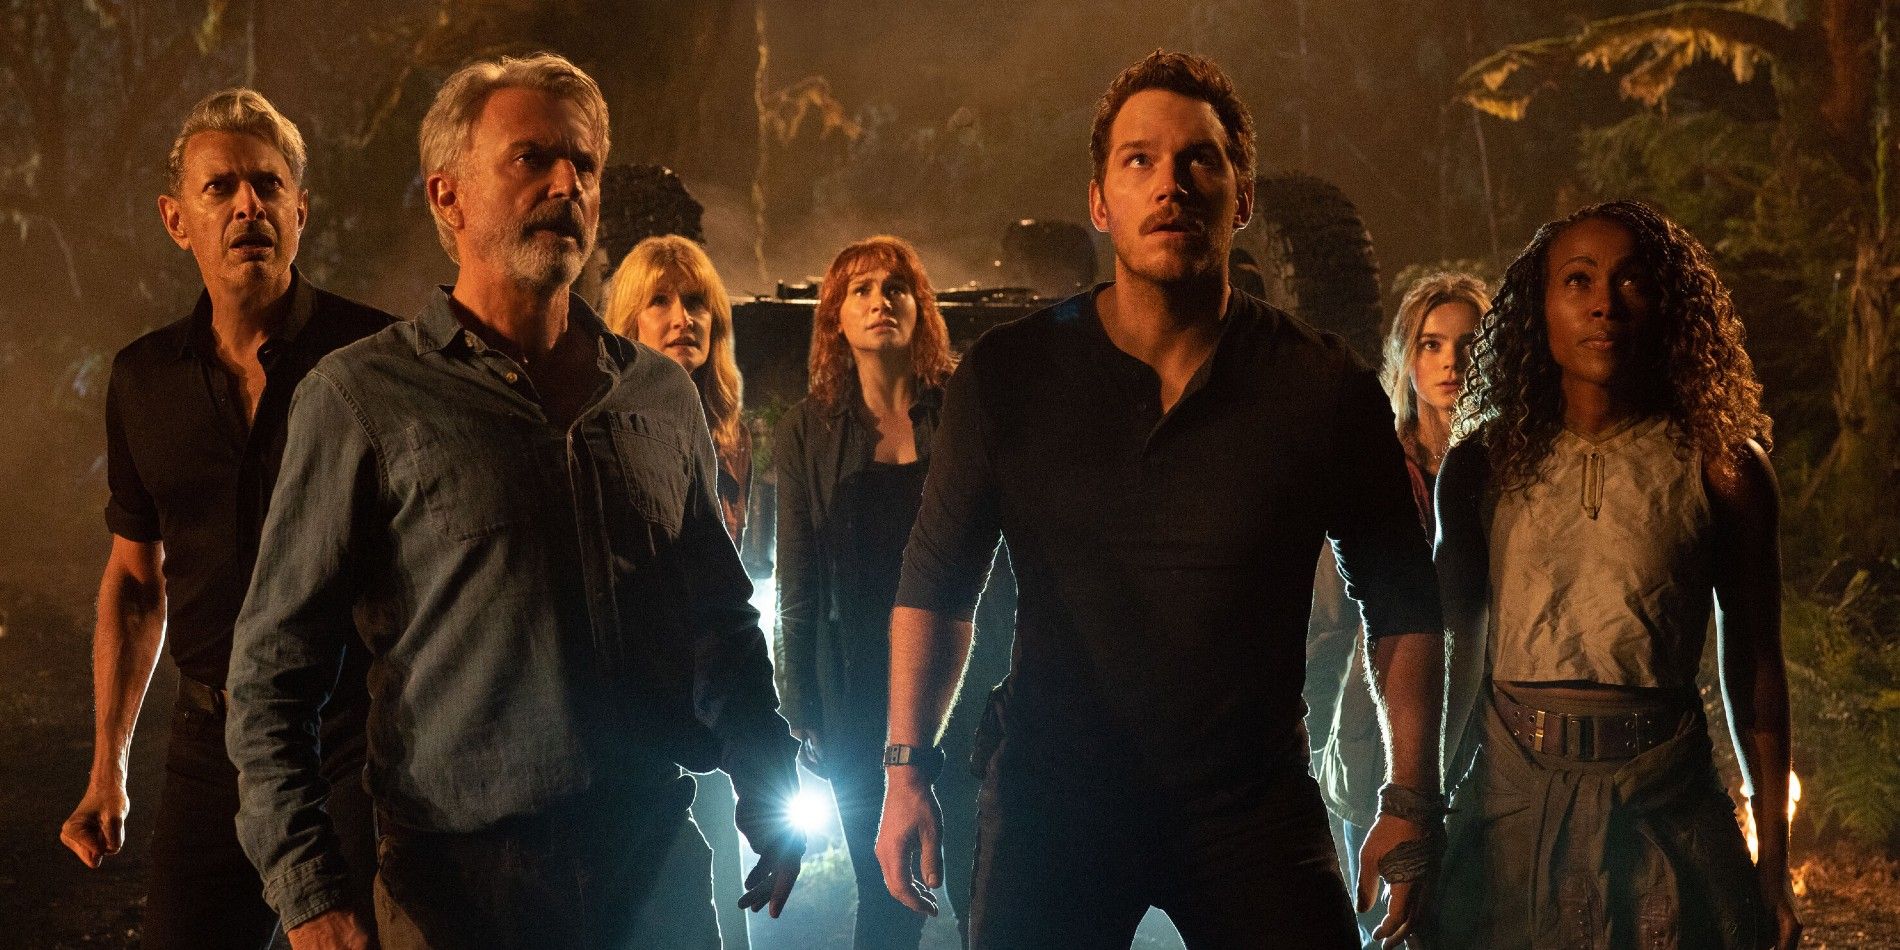 The cast of the Jurassic Park and Jurassic World movies united in Jurassic World: Dominion